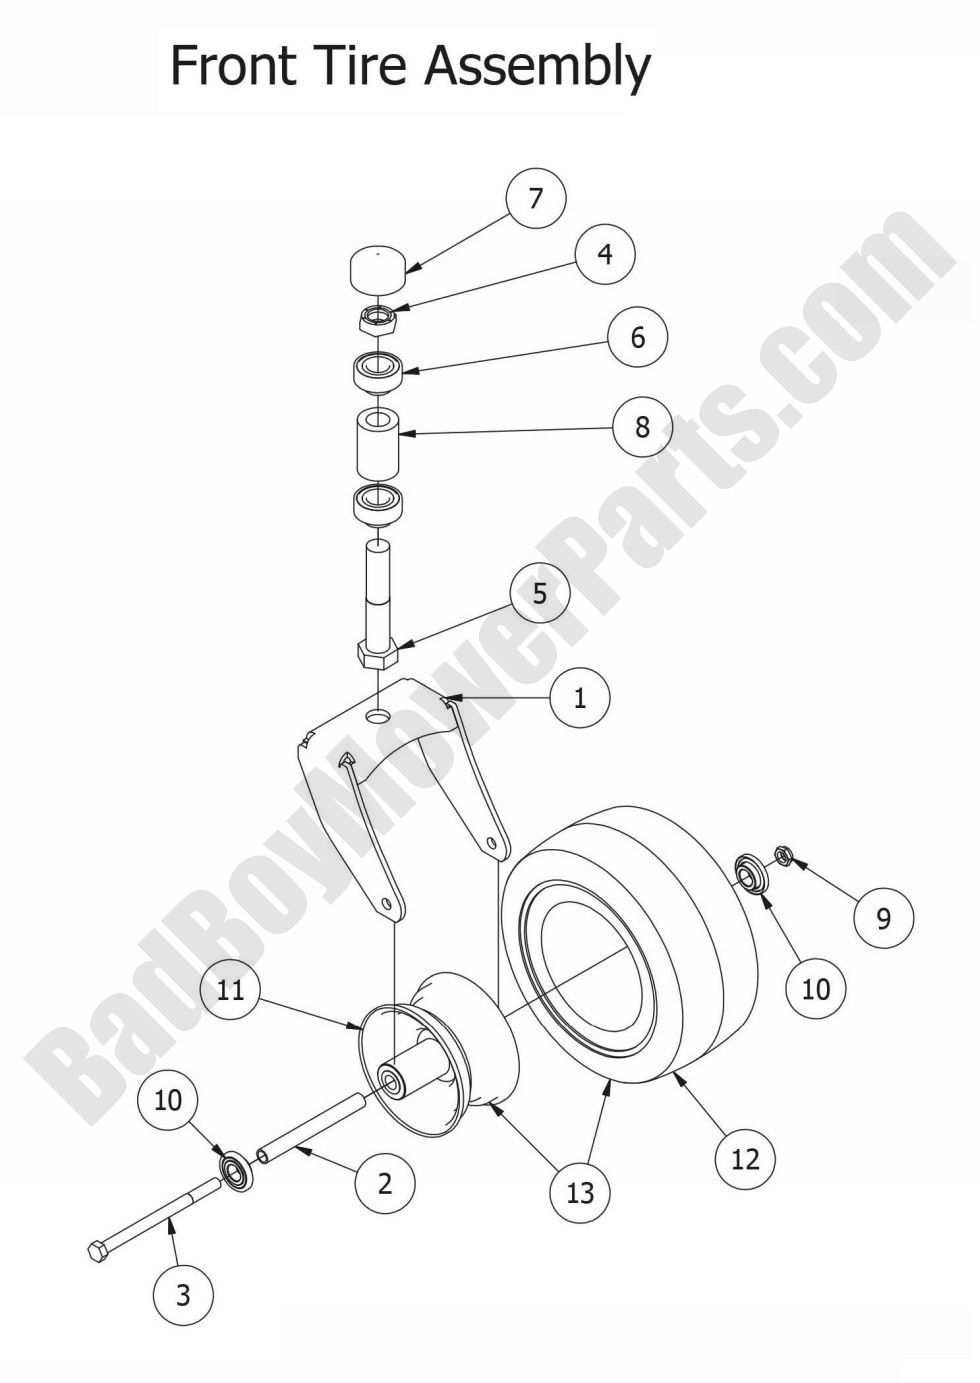 2015 MZ Front Tire Assembly